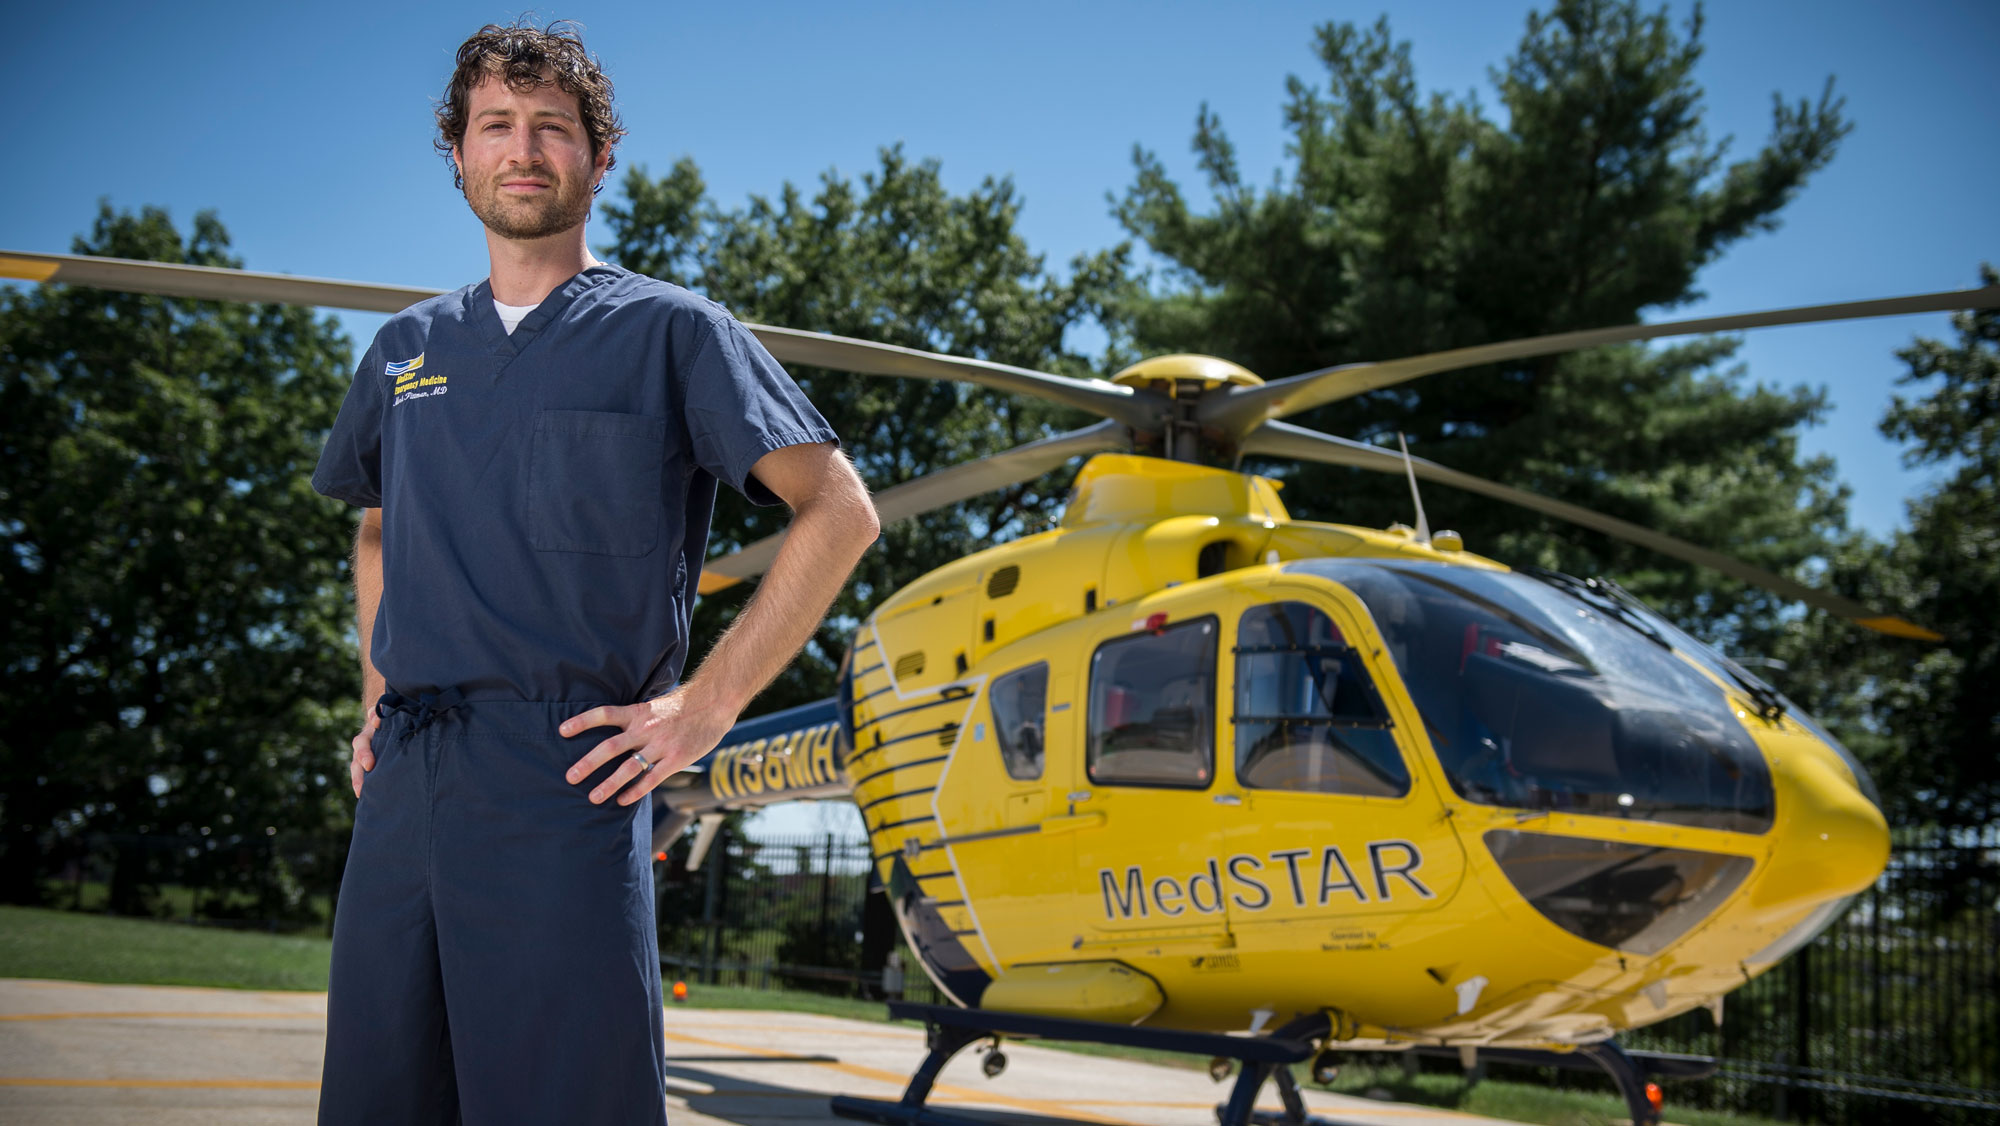 Student standing outside of a hospital helicopter in scrubs